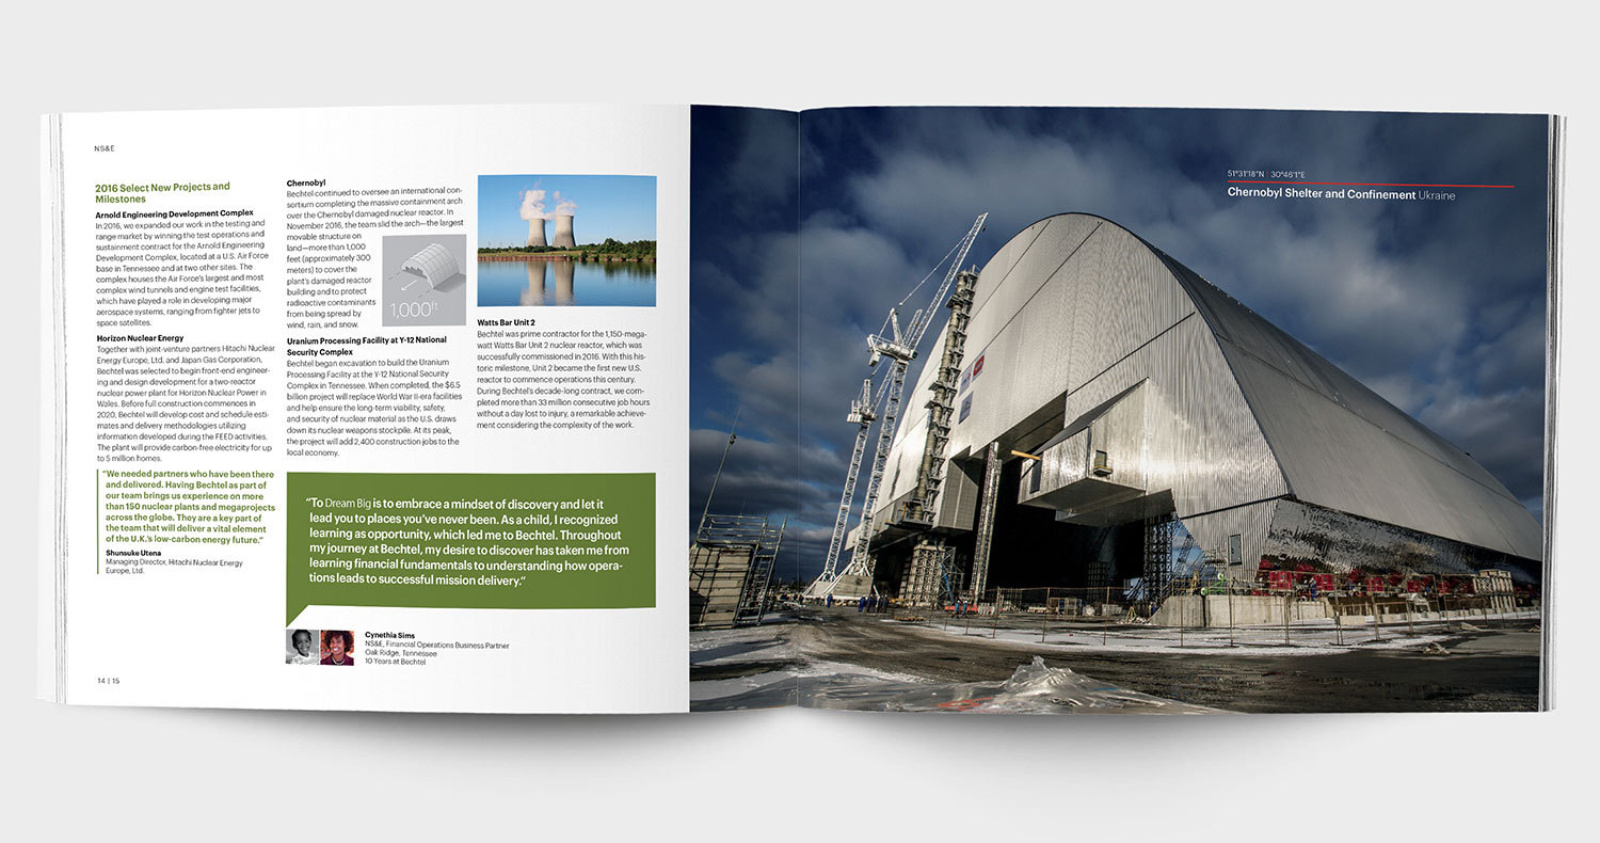 Open spread from the 2017 Bechtel "Dream Big" annual report design, with a large image of Chernobyl and a pull quote